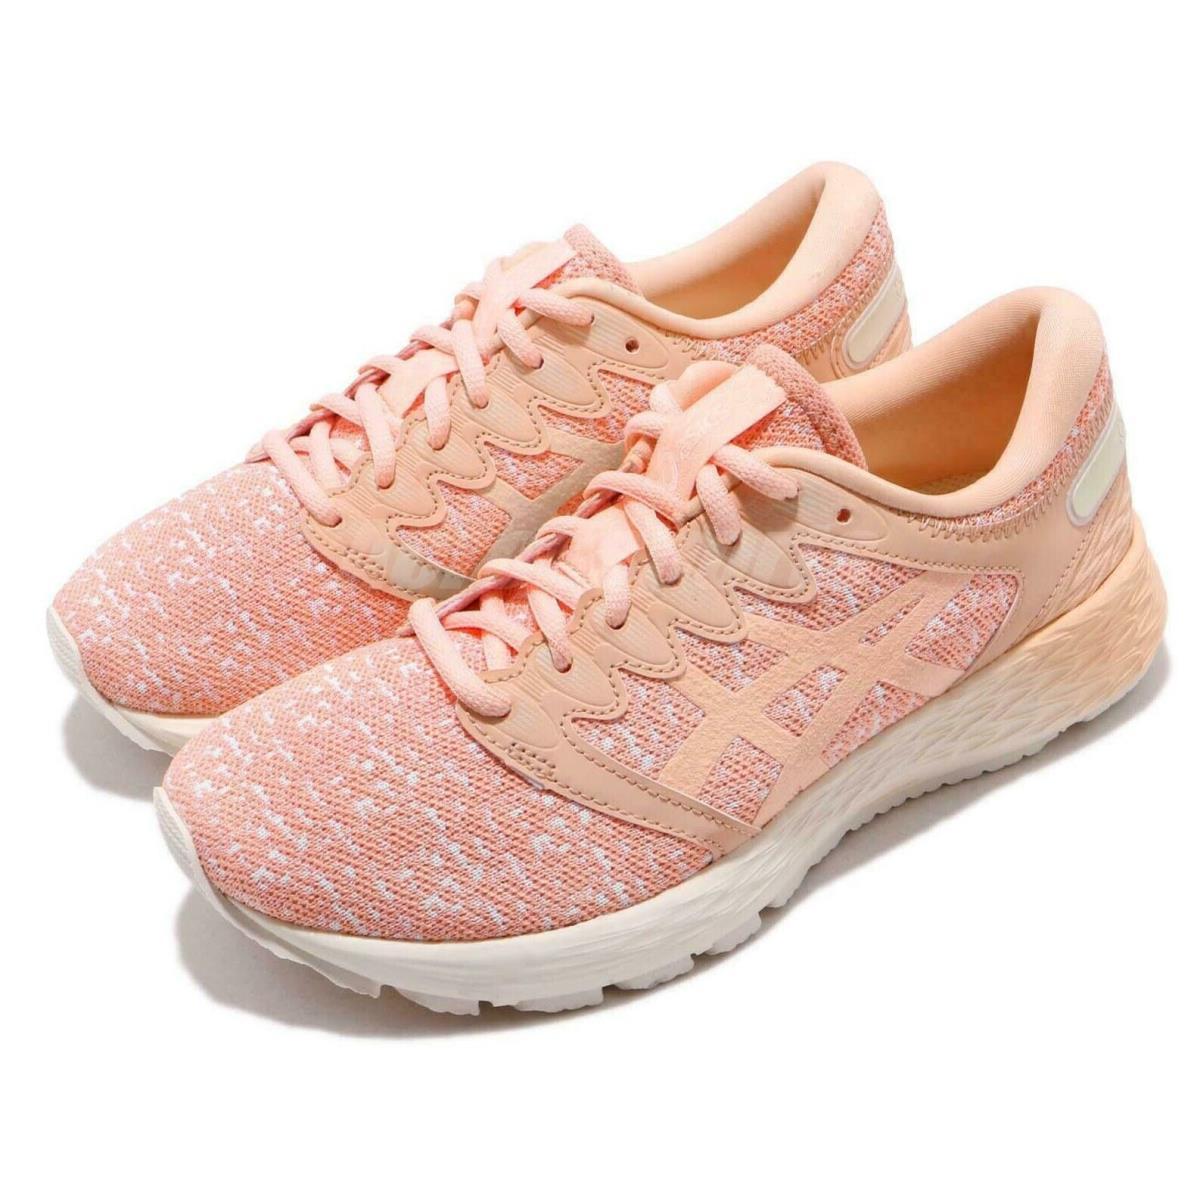 Asics Roadhawk FF 2 MX Baked Pink 1012A232-700 Women`s Casual Running Shoes - Baked Pink